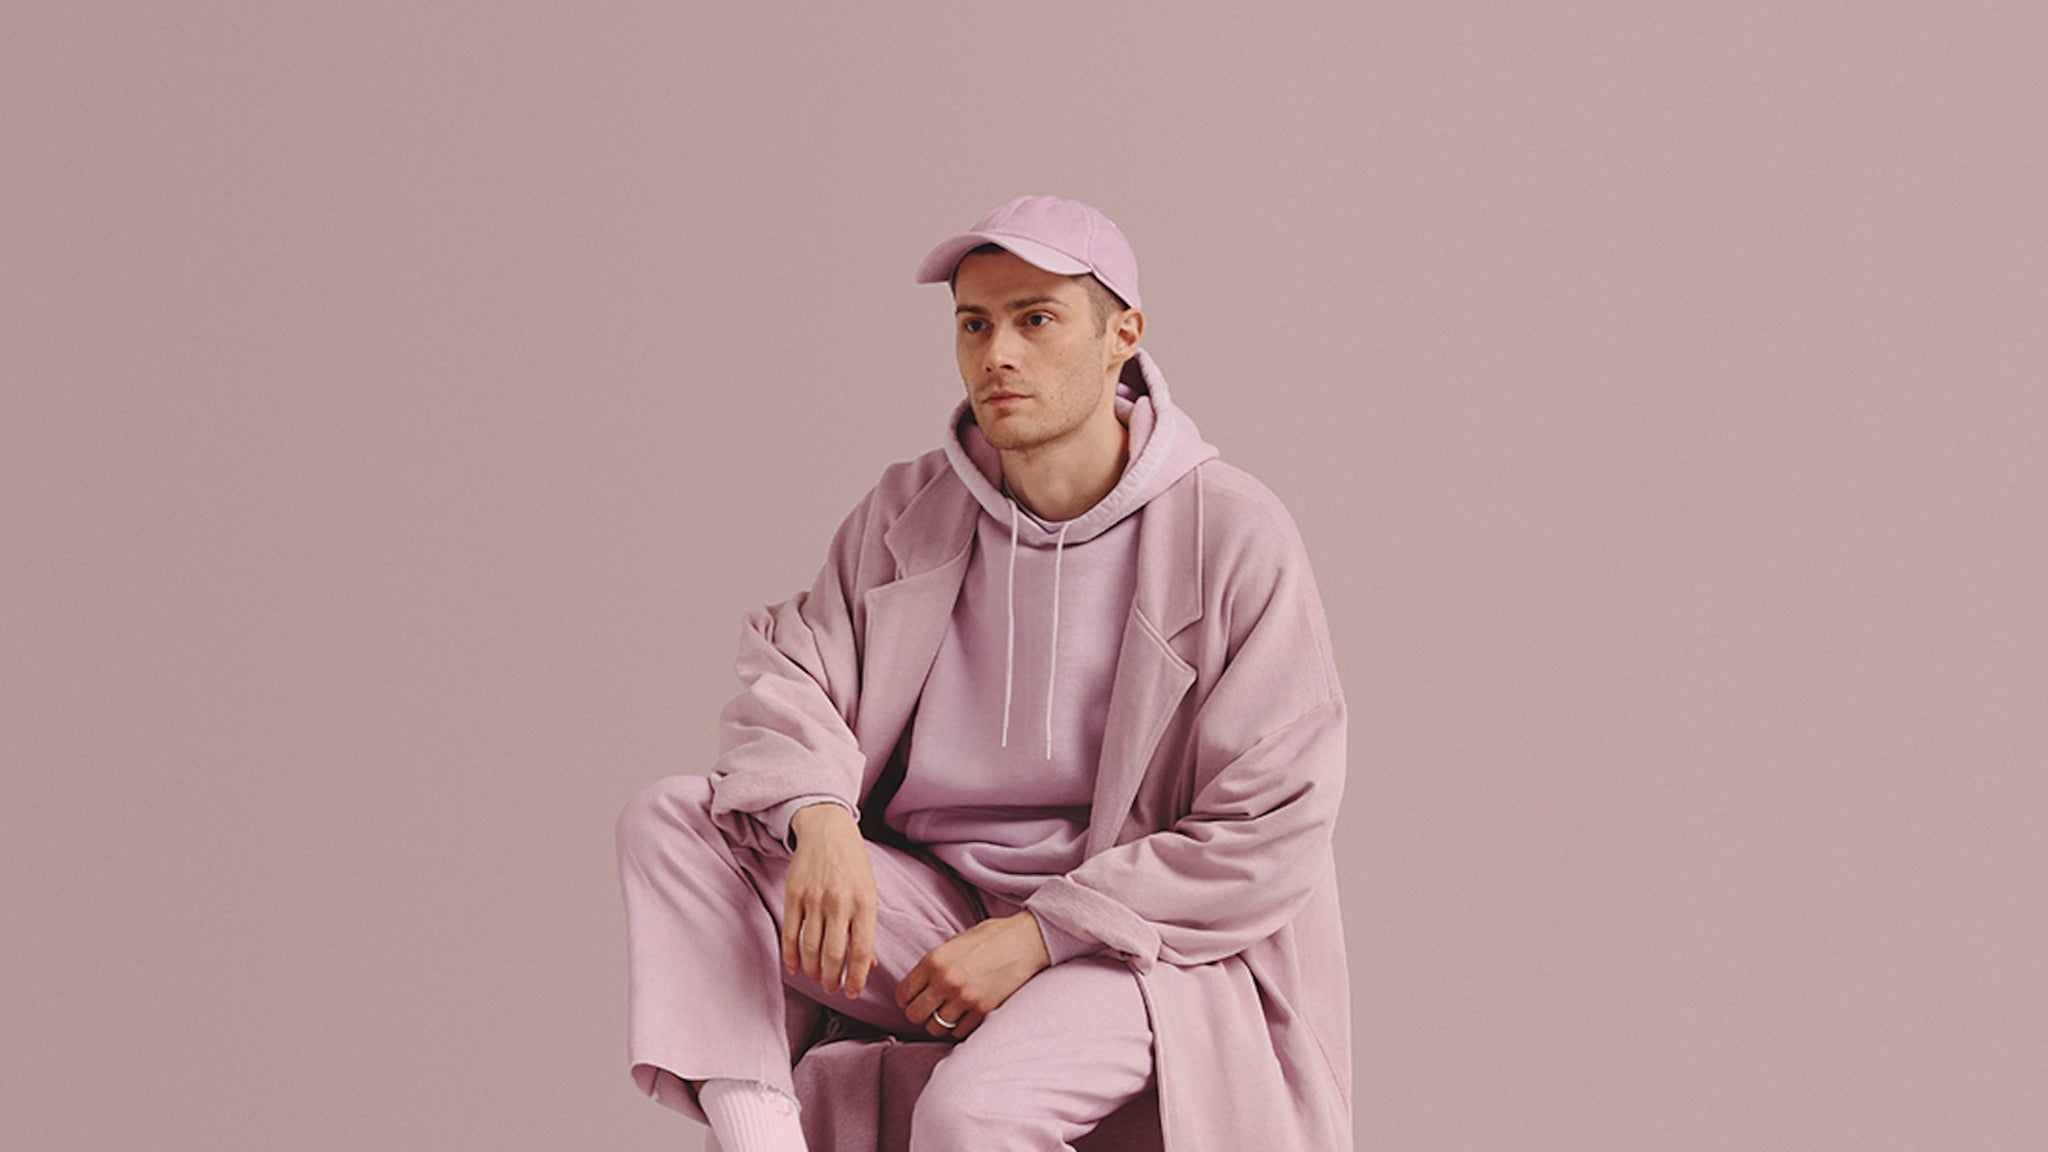 Rac: Boy Tour 2020 in Charlotte promo photo for Live Nation presale offer code